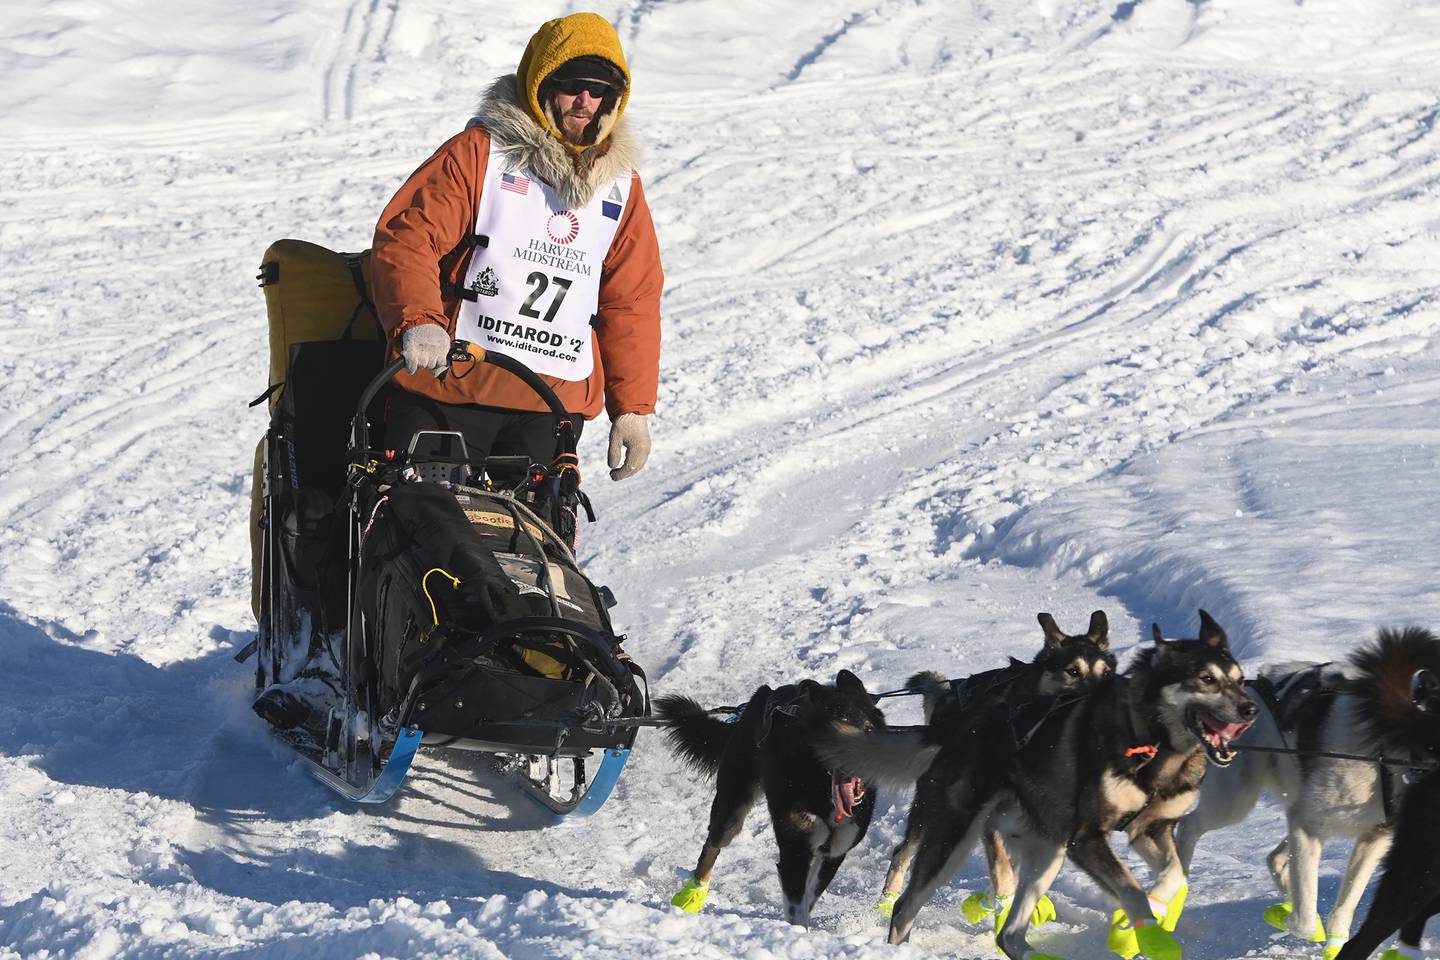 Iditarod Trail Sled Dog Race in Willow